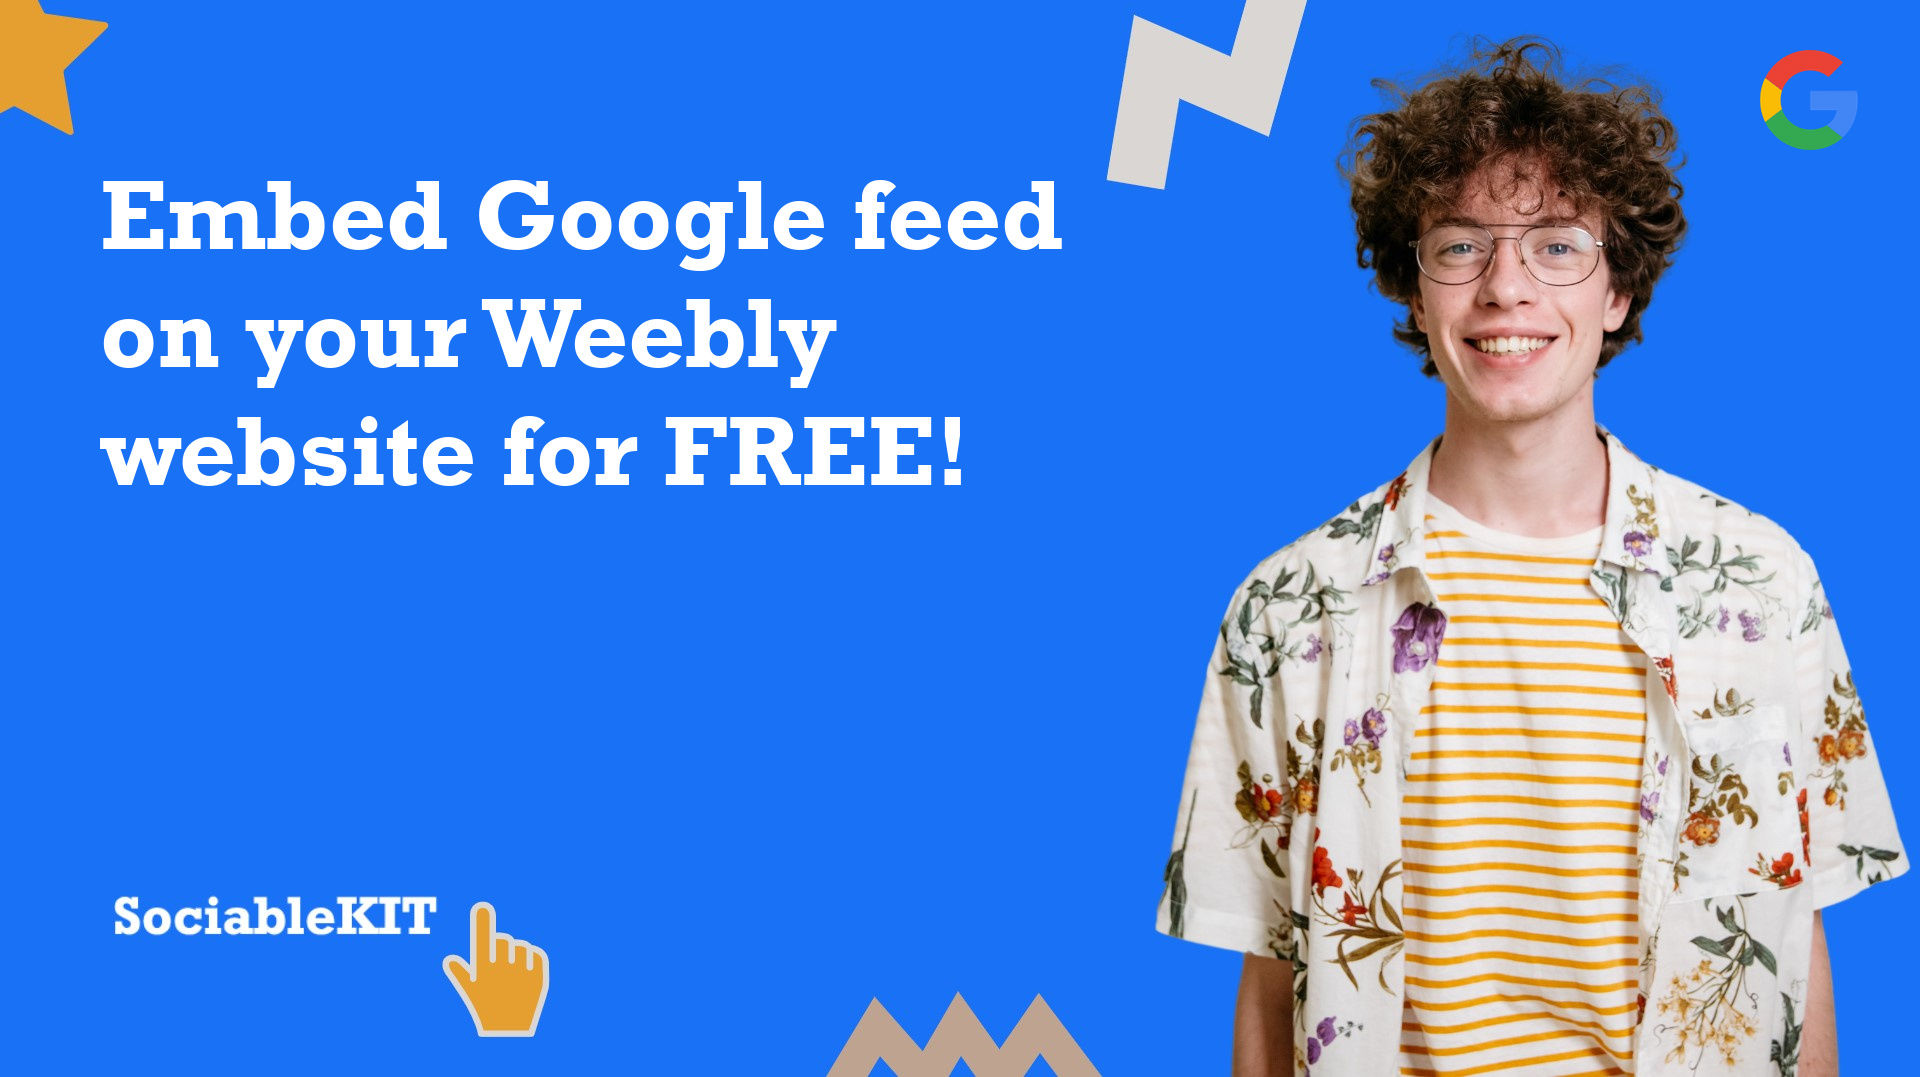 How to embed Google feed on your Weebly website for FREE?